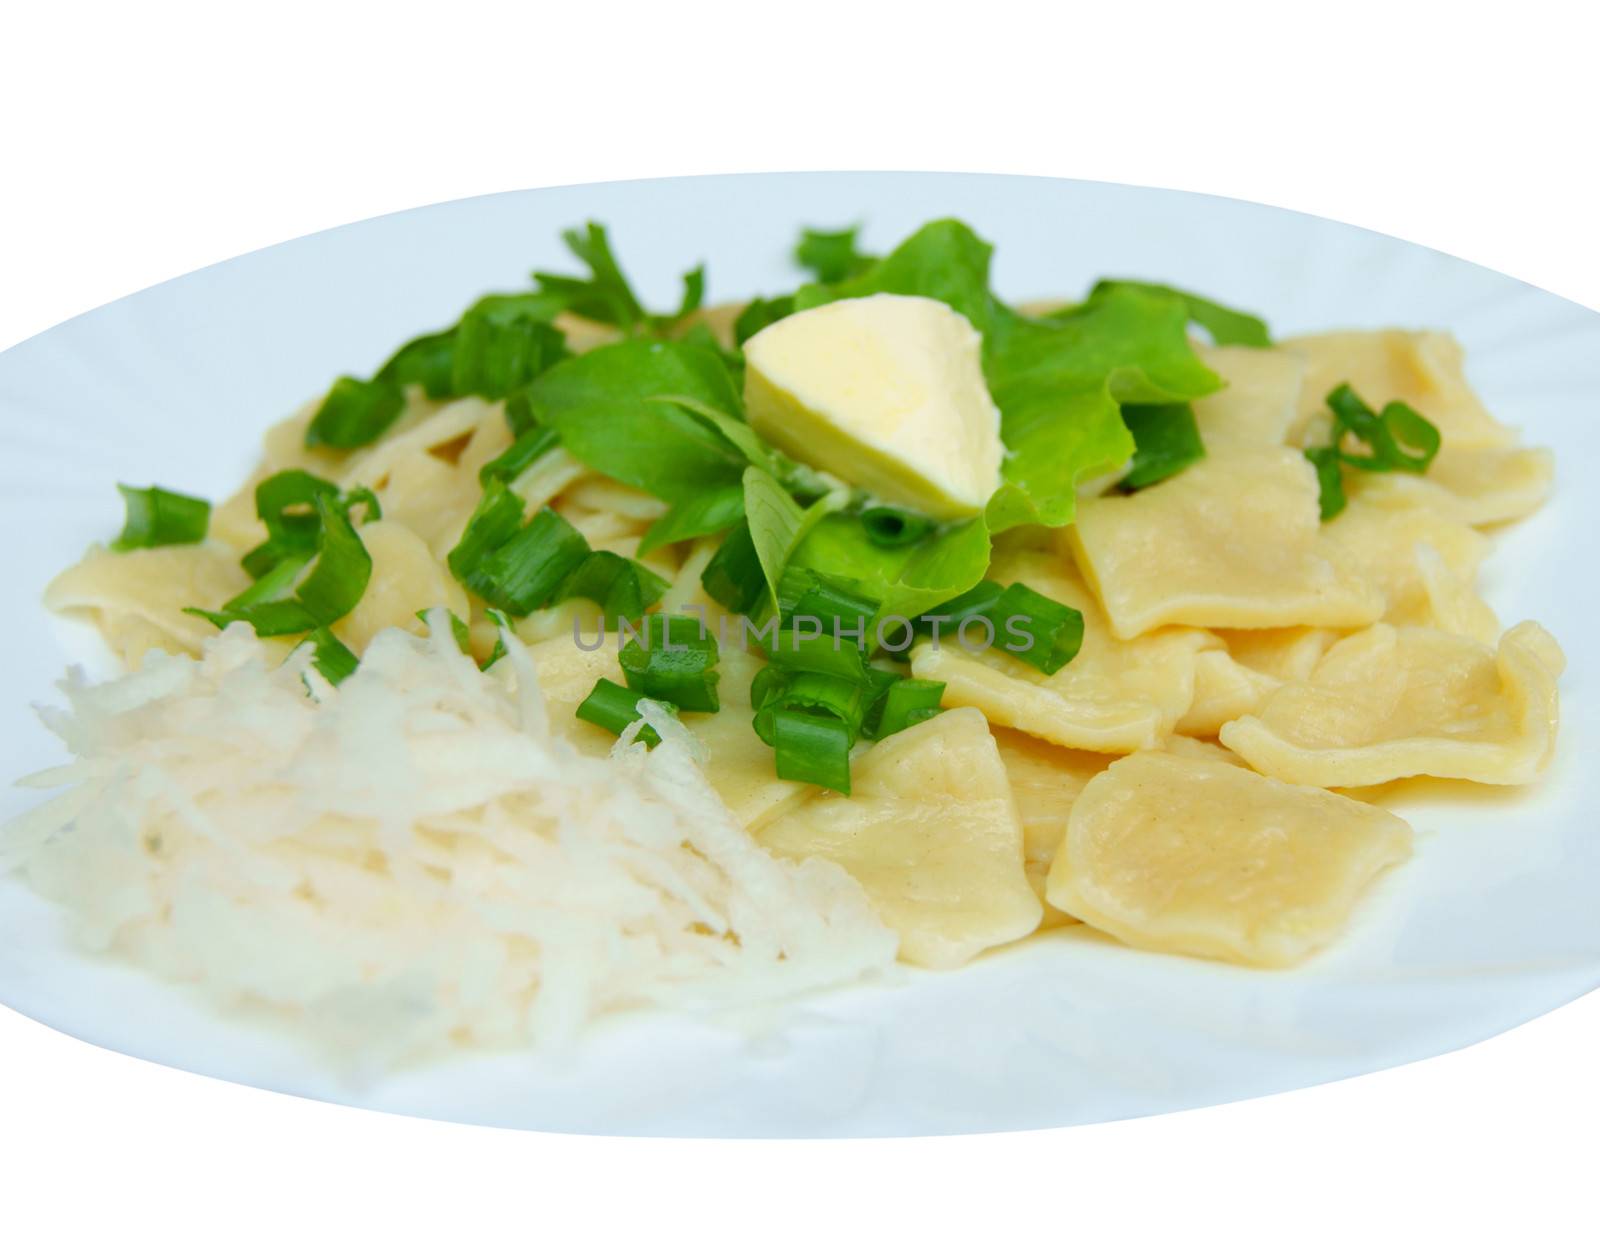 Dumplings with salad on plate on white background